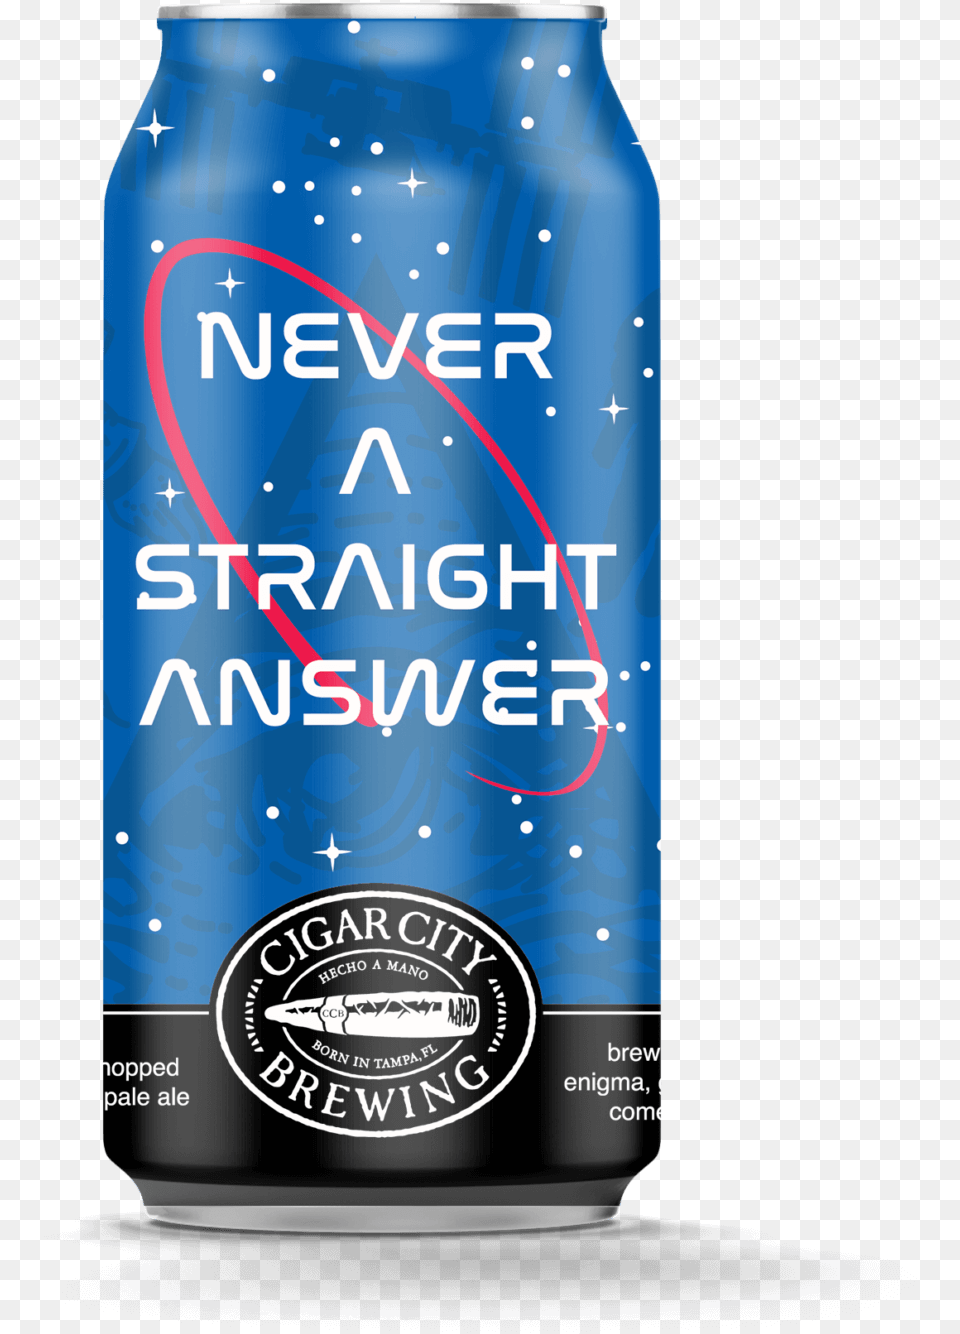 Never A Straight Answer Guinness, Alcohol, Beer, Beverage, Lager Png Image